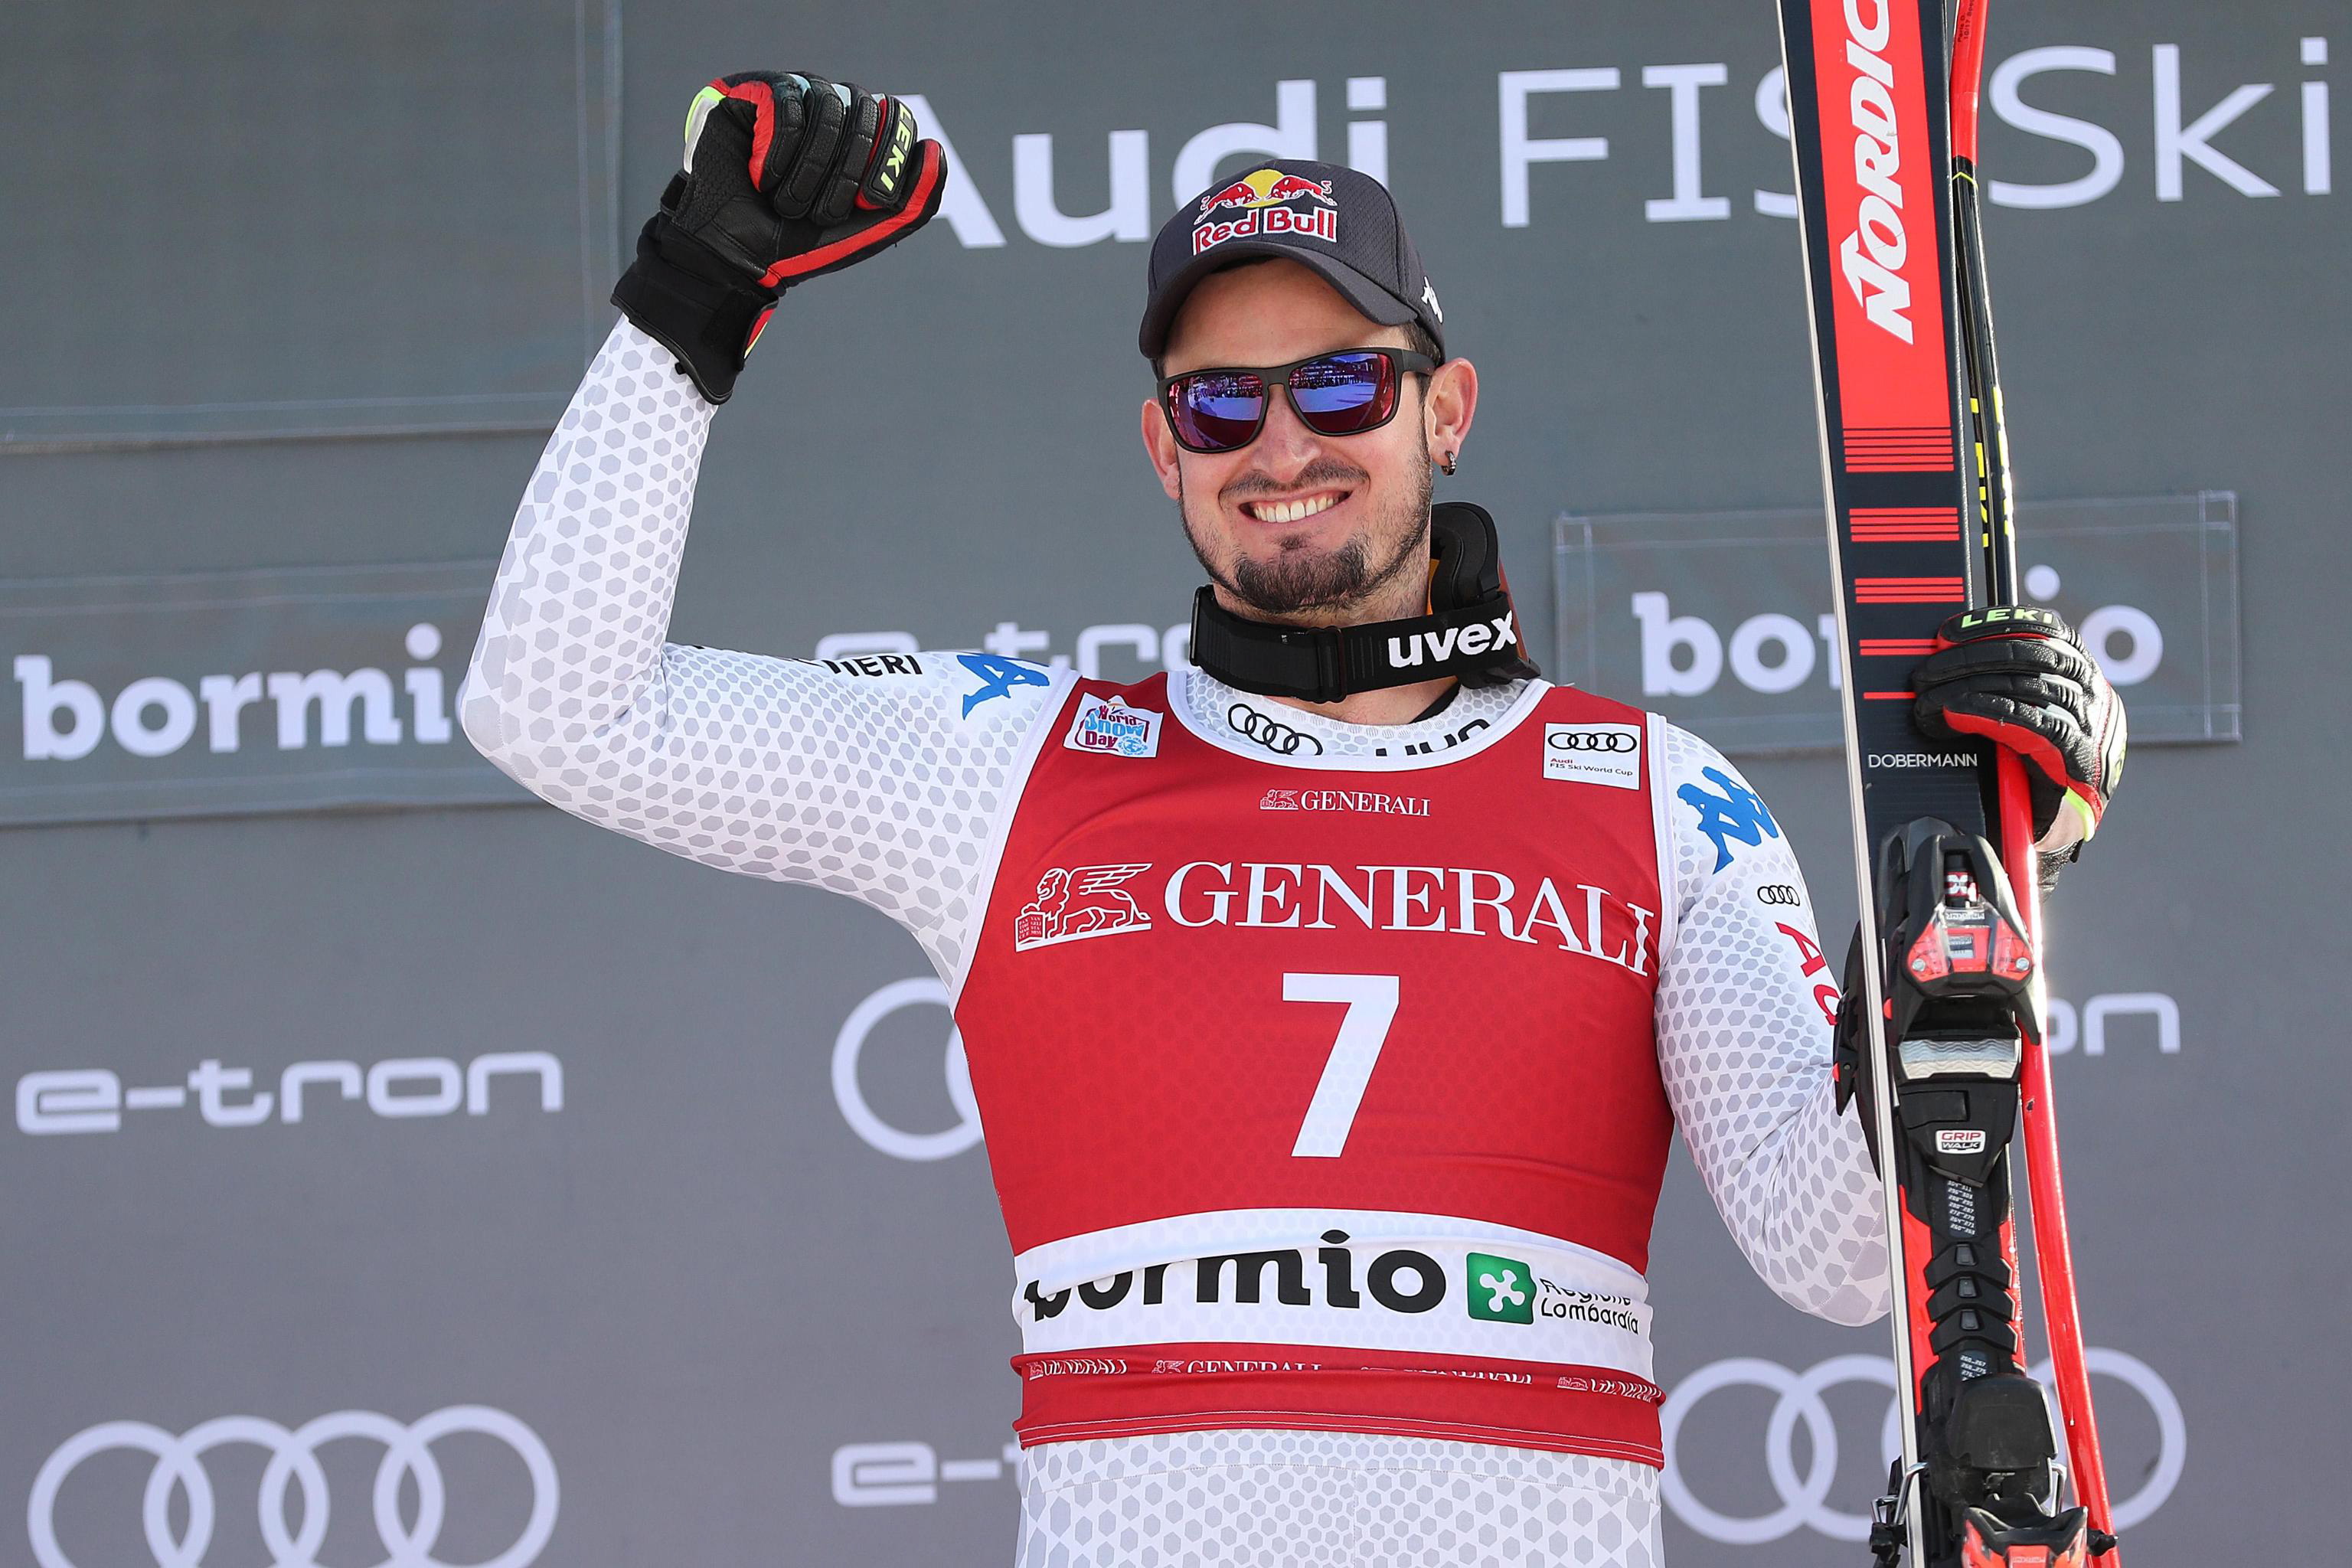 epa07251505 Winner Dominik Paris of Italy celebrates on the podium after the Men's Downhill race at the FIS Alpine Skiing World Cup event in Bormio, Italy, 28 December 2018.  EPA/ANDREA SOLERO